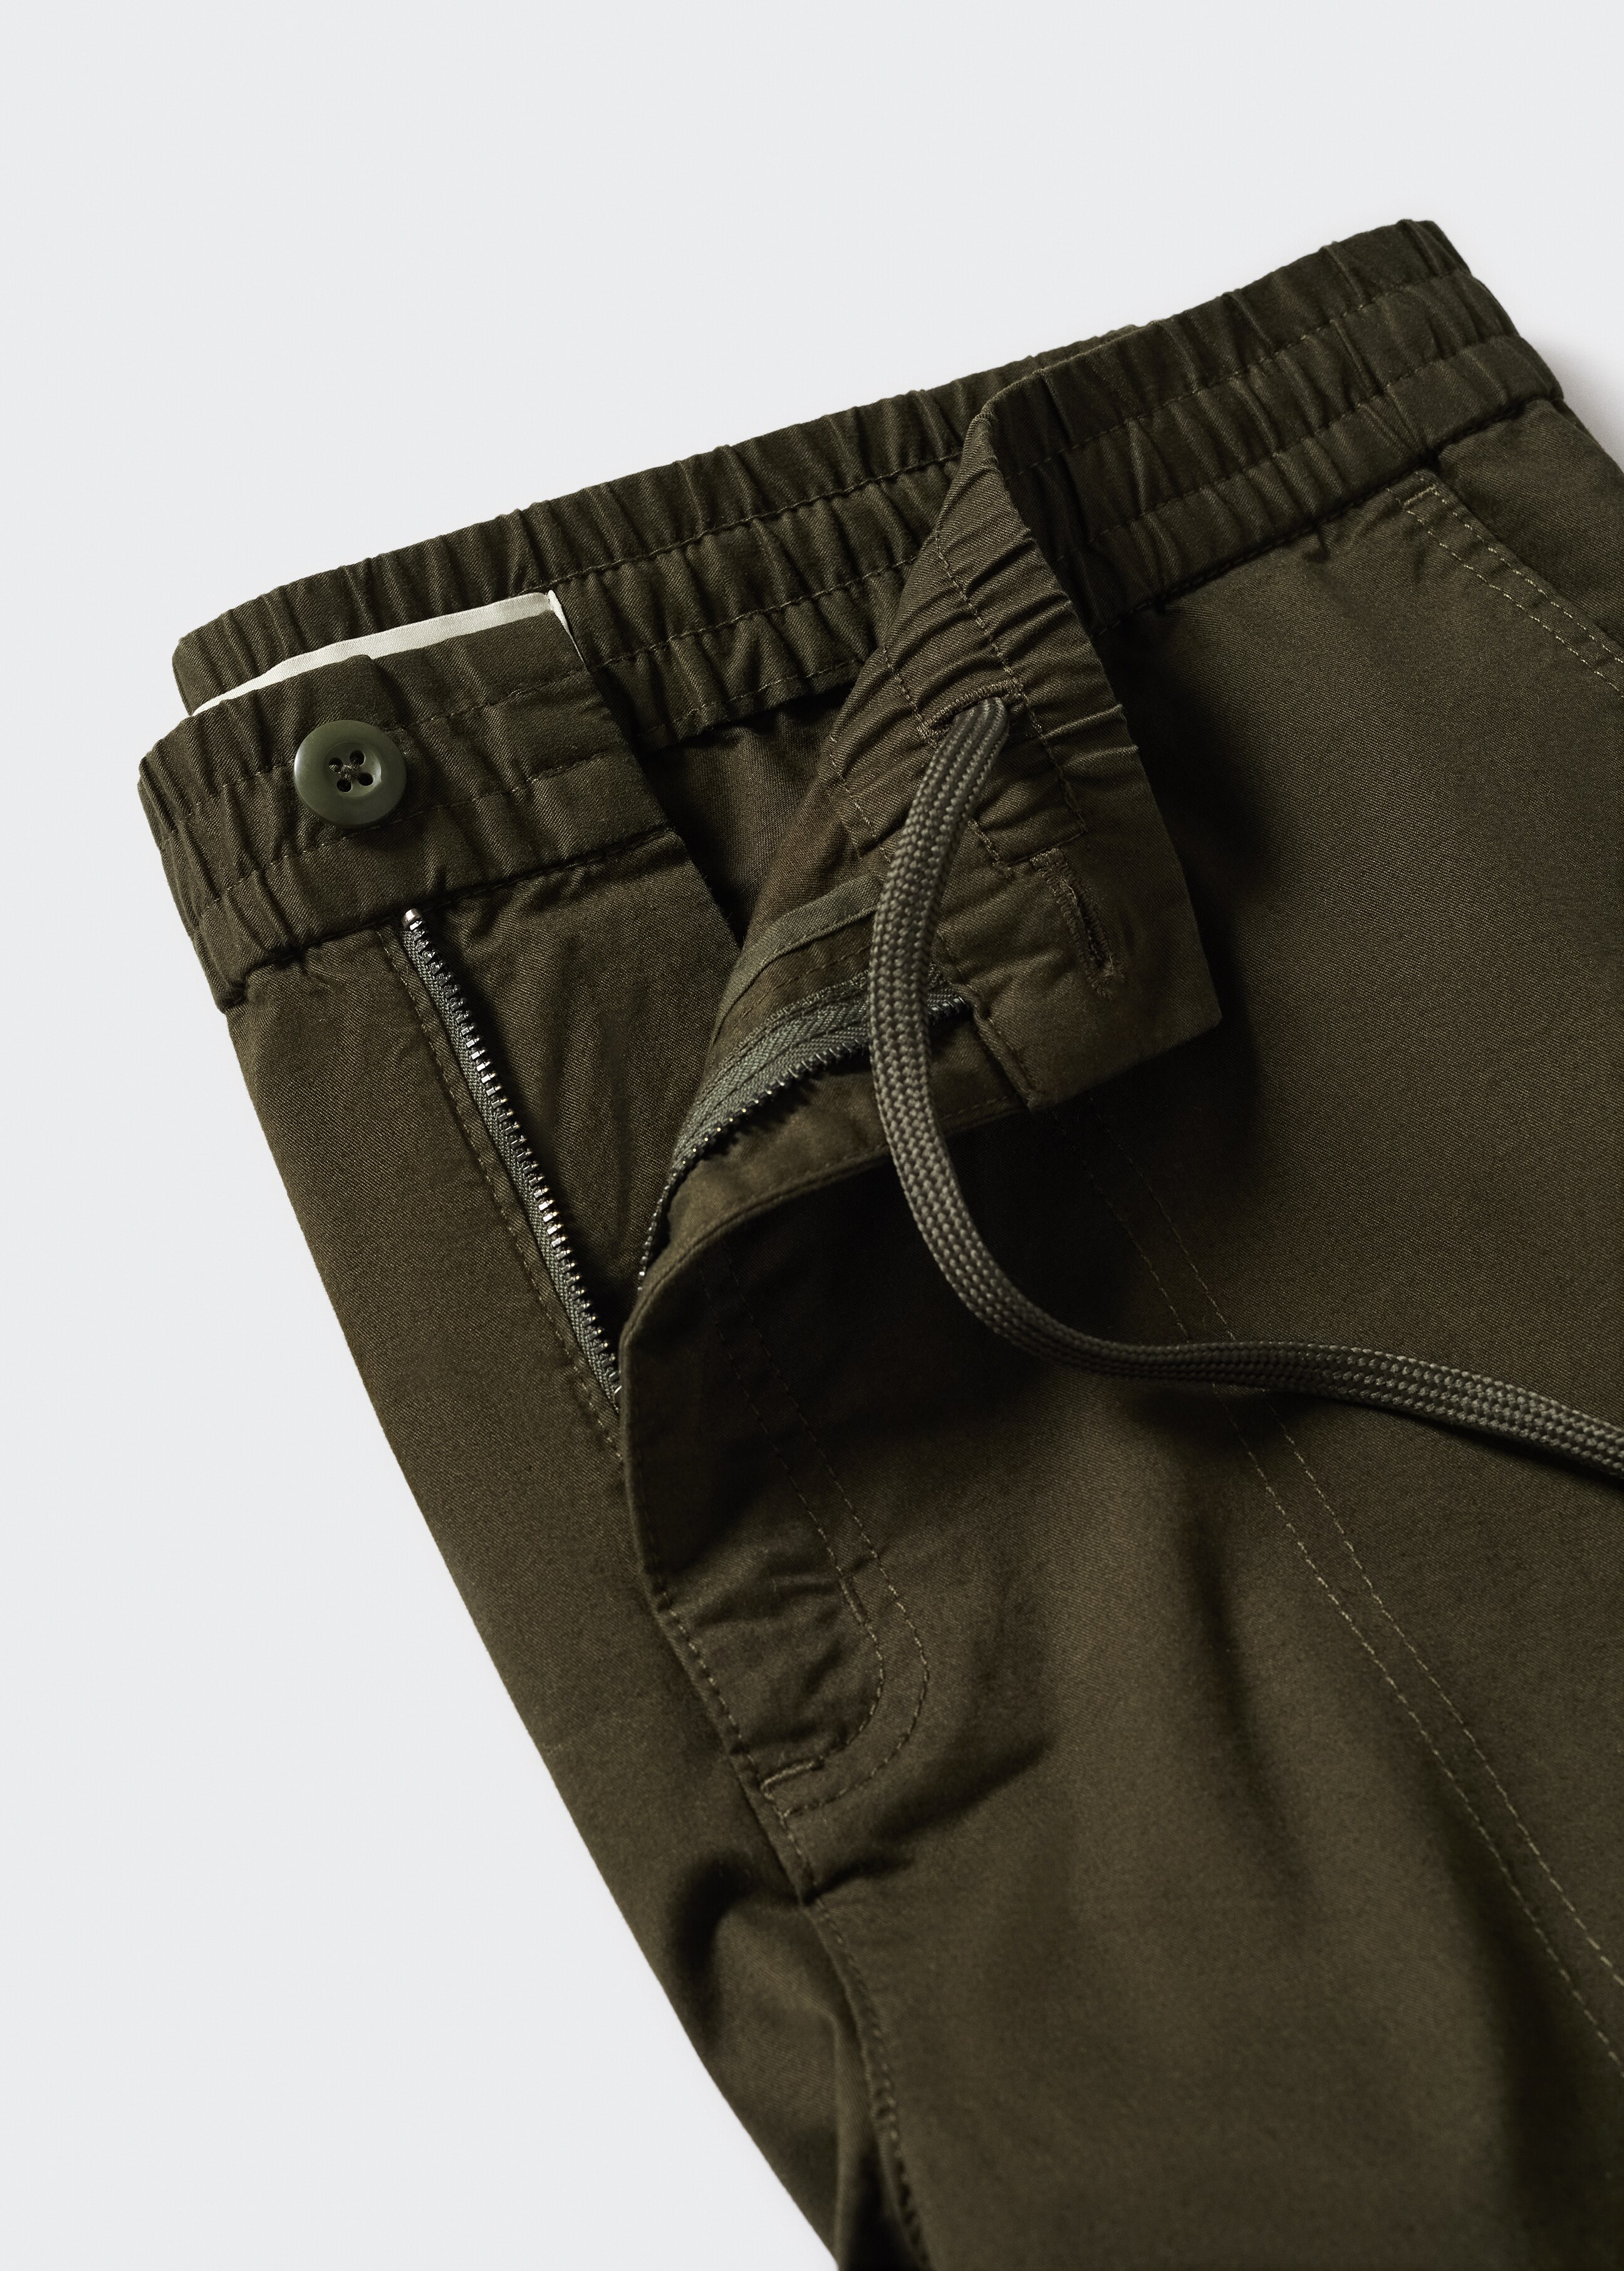 Cotton cargo pants - Details of the article 7